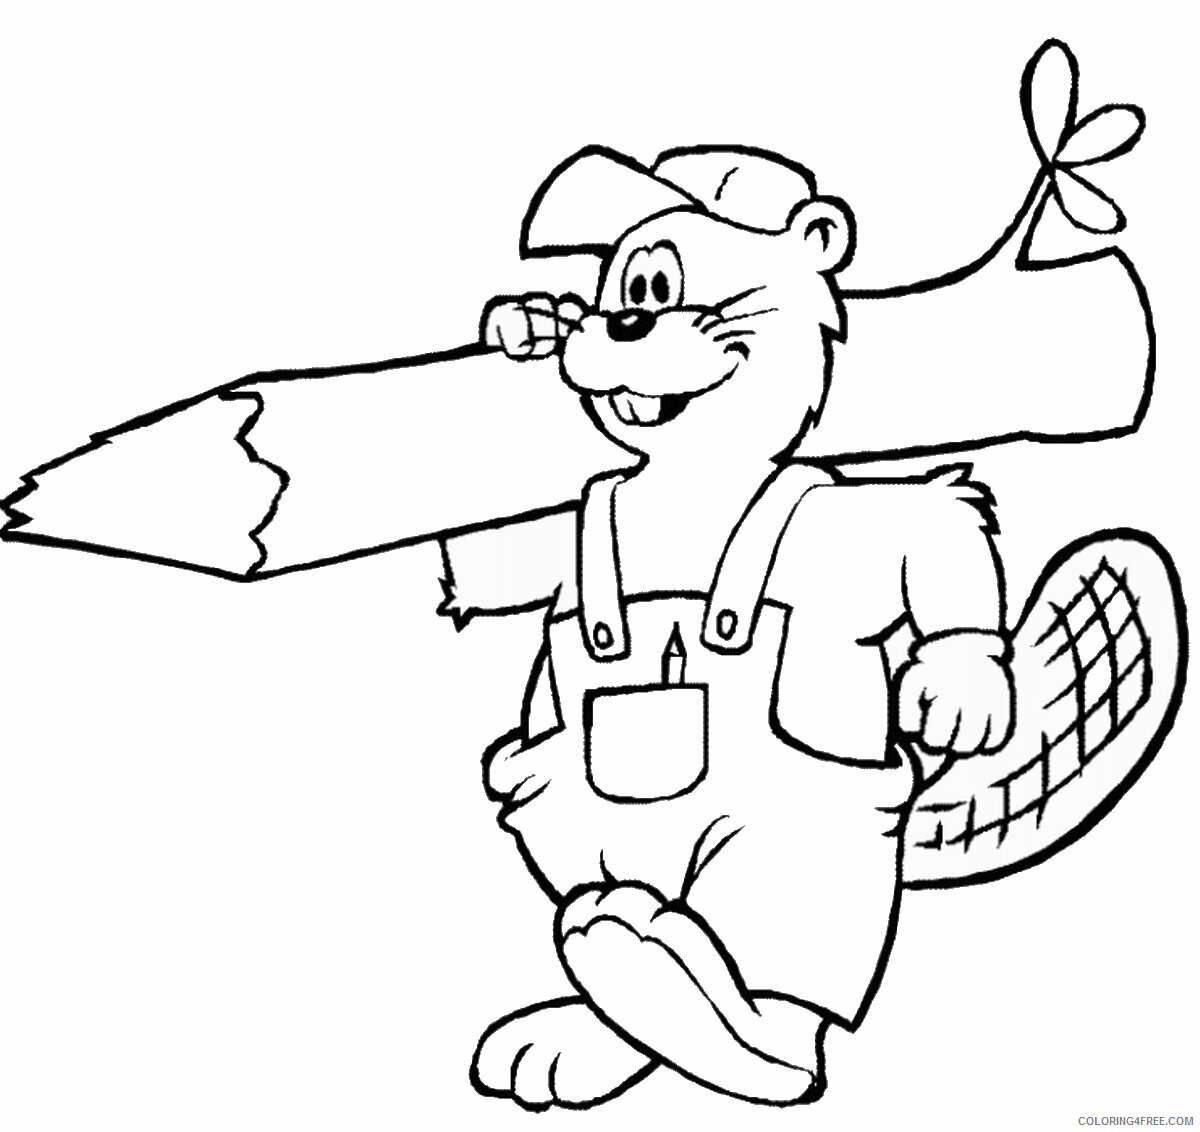 Beaver Coloring Pages Animal Printable Sheets beaver_coloring_8 2021 0338 Coloring4free